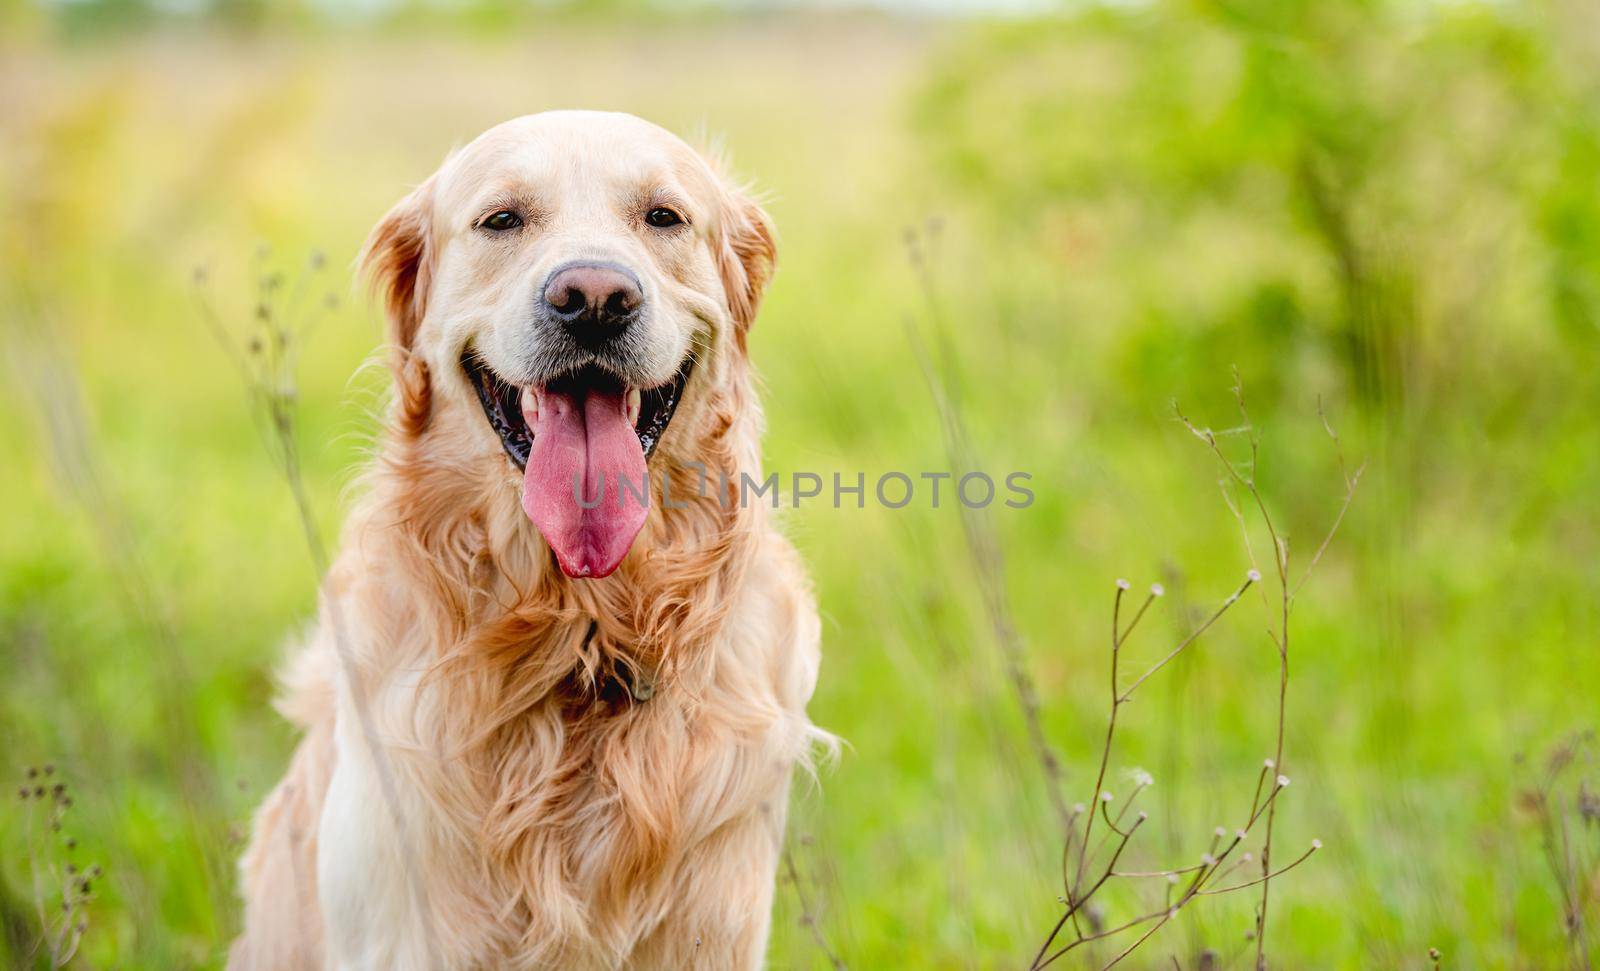 Golden retriever dog looking at the camera during summer walk outdoors. Cute doggy pet labrador sitting in green grass